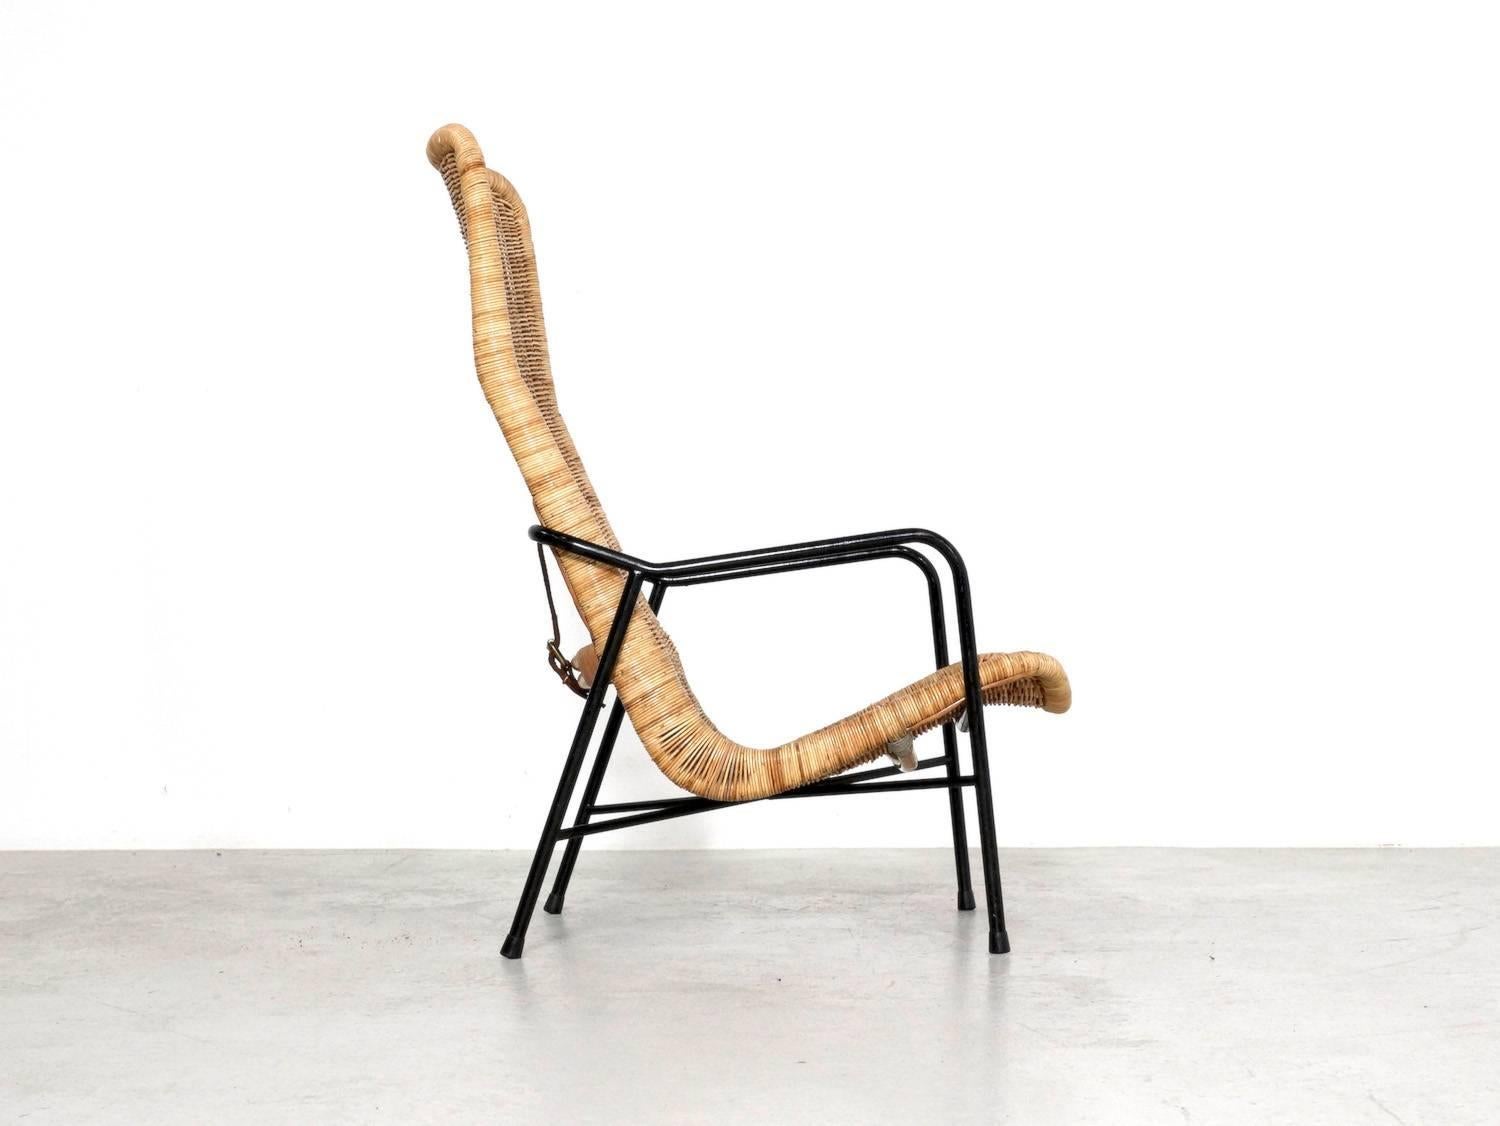 This rattan easy chair, model 514A, was designed by Dirk van Sliedregt in 1952 for Gebr. Jonkers in Noordwolde, Netherlands. It has a black metal frame, and a high back rattan bucket seat, which is connected to the frame by a leather belt at the